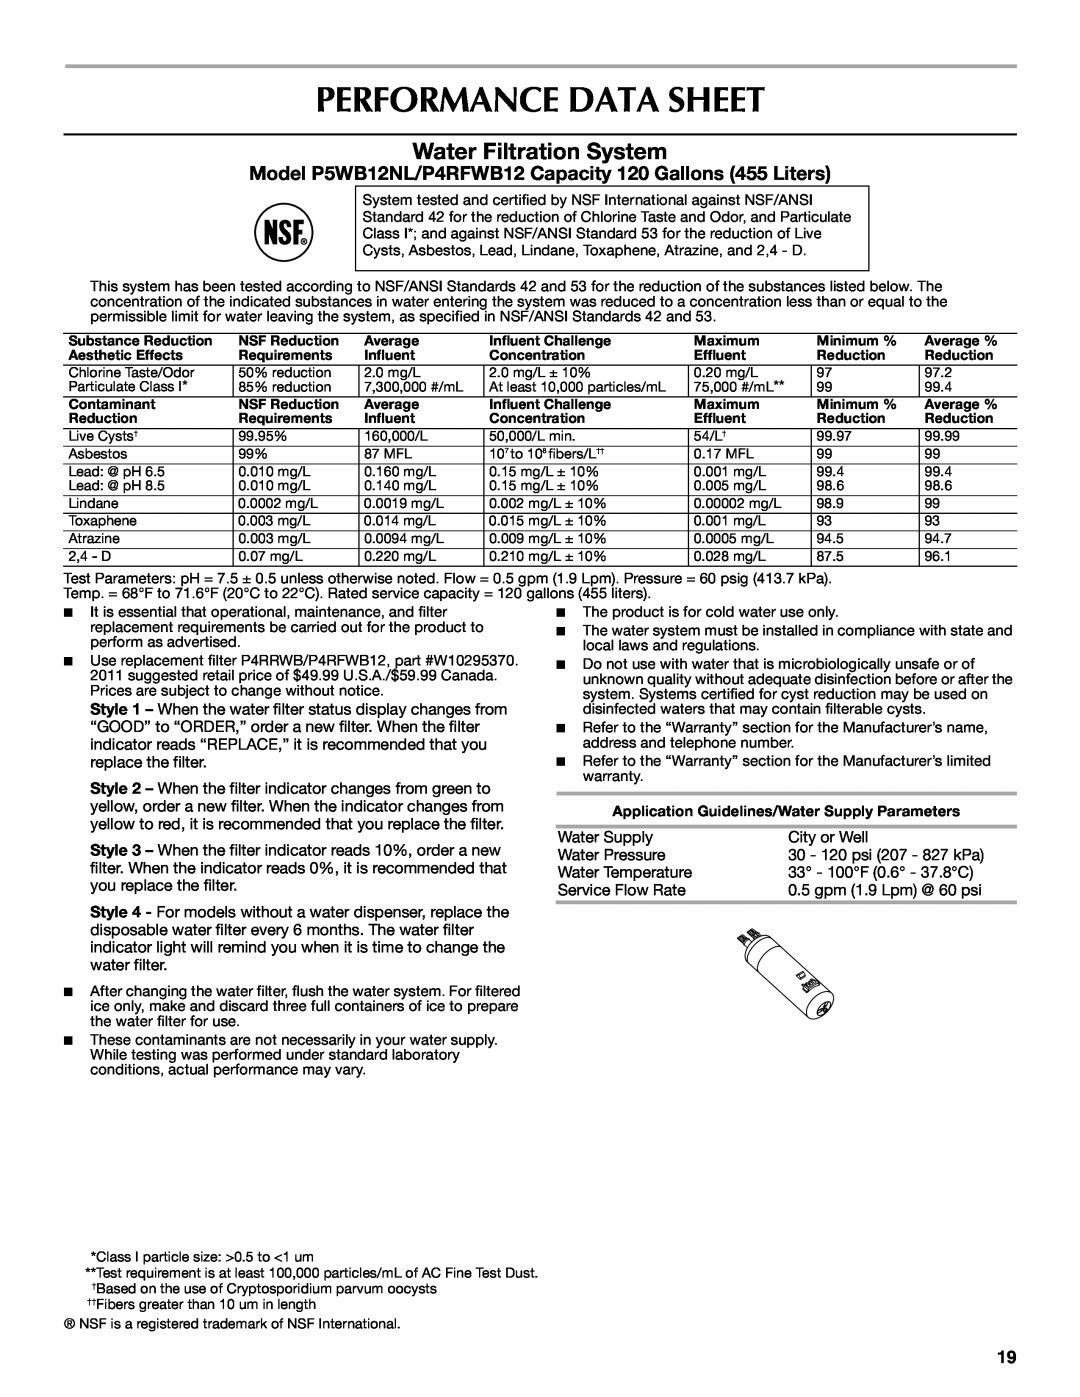 Maytag W10359302A installation instructions Performance Data Sheet, Water Filtration System 